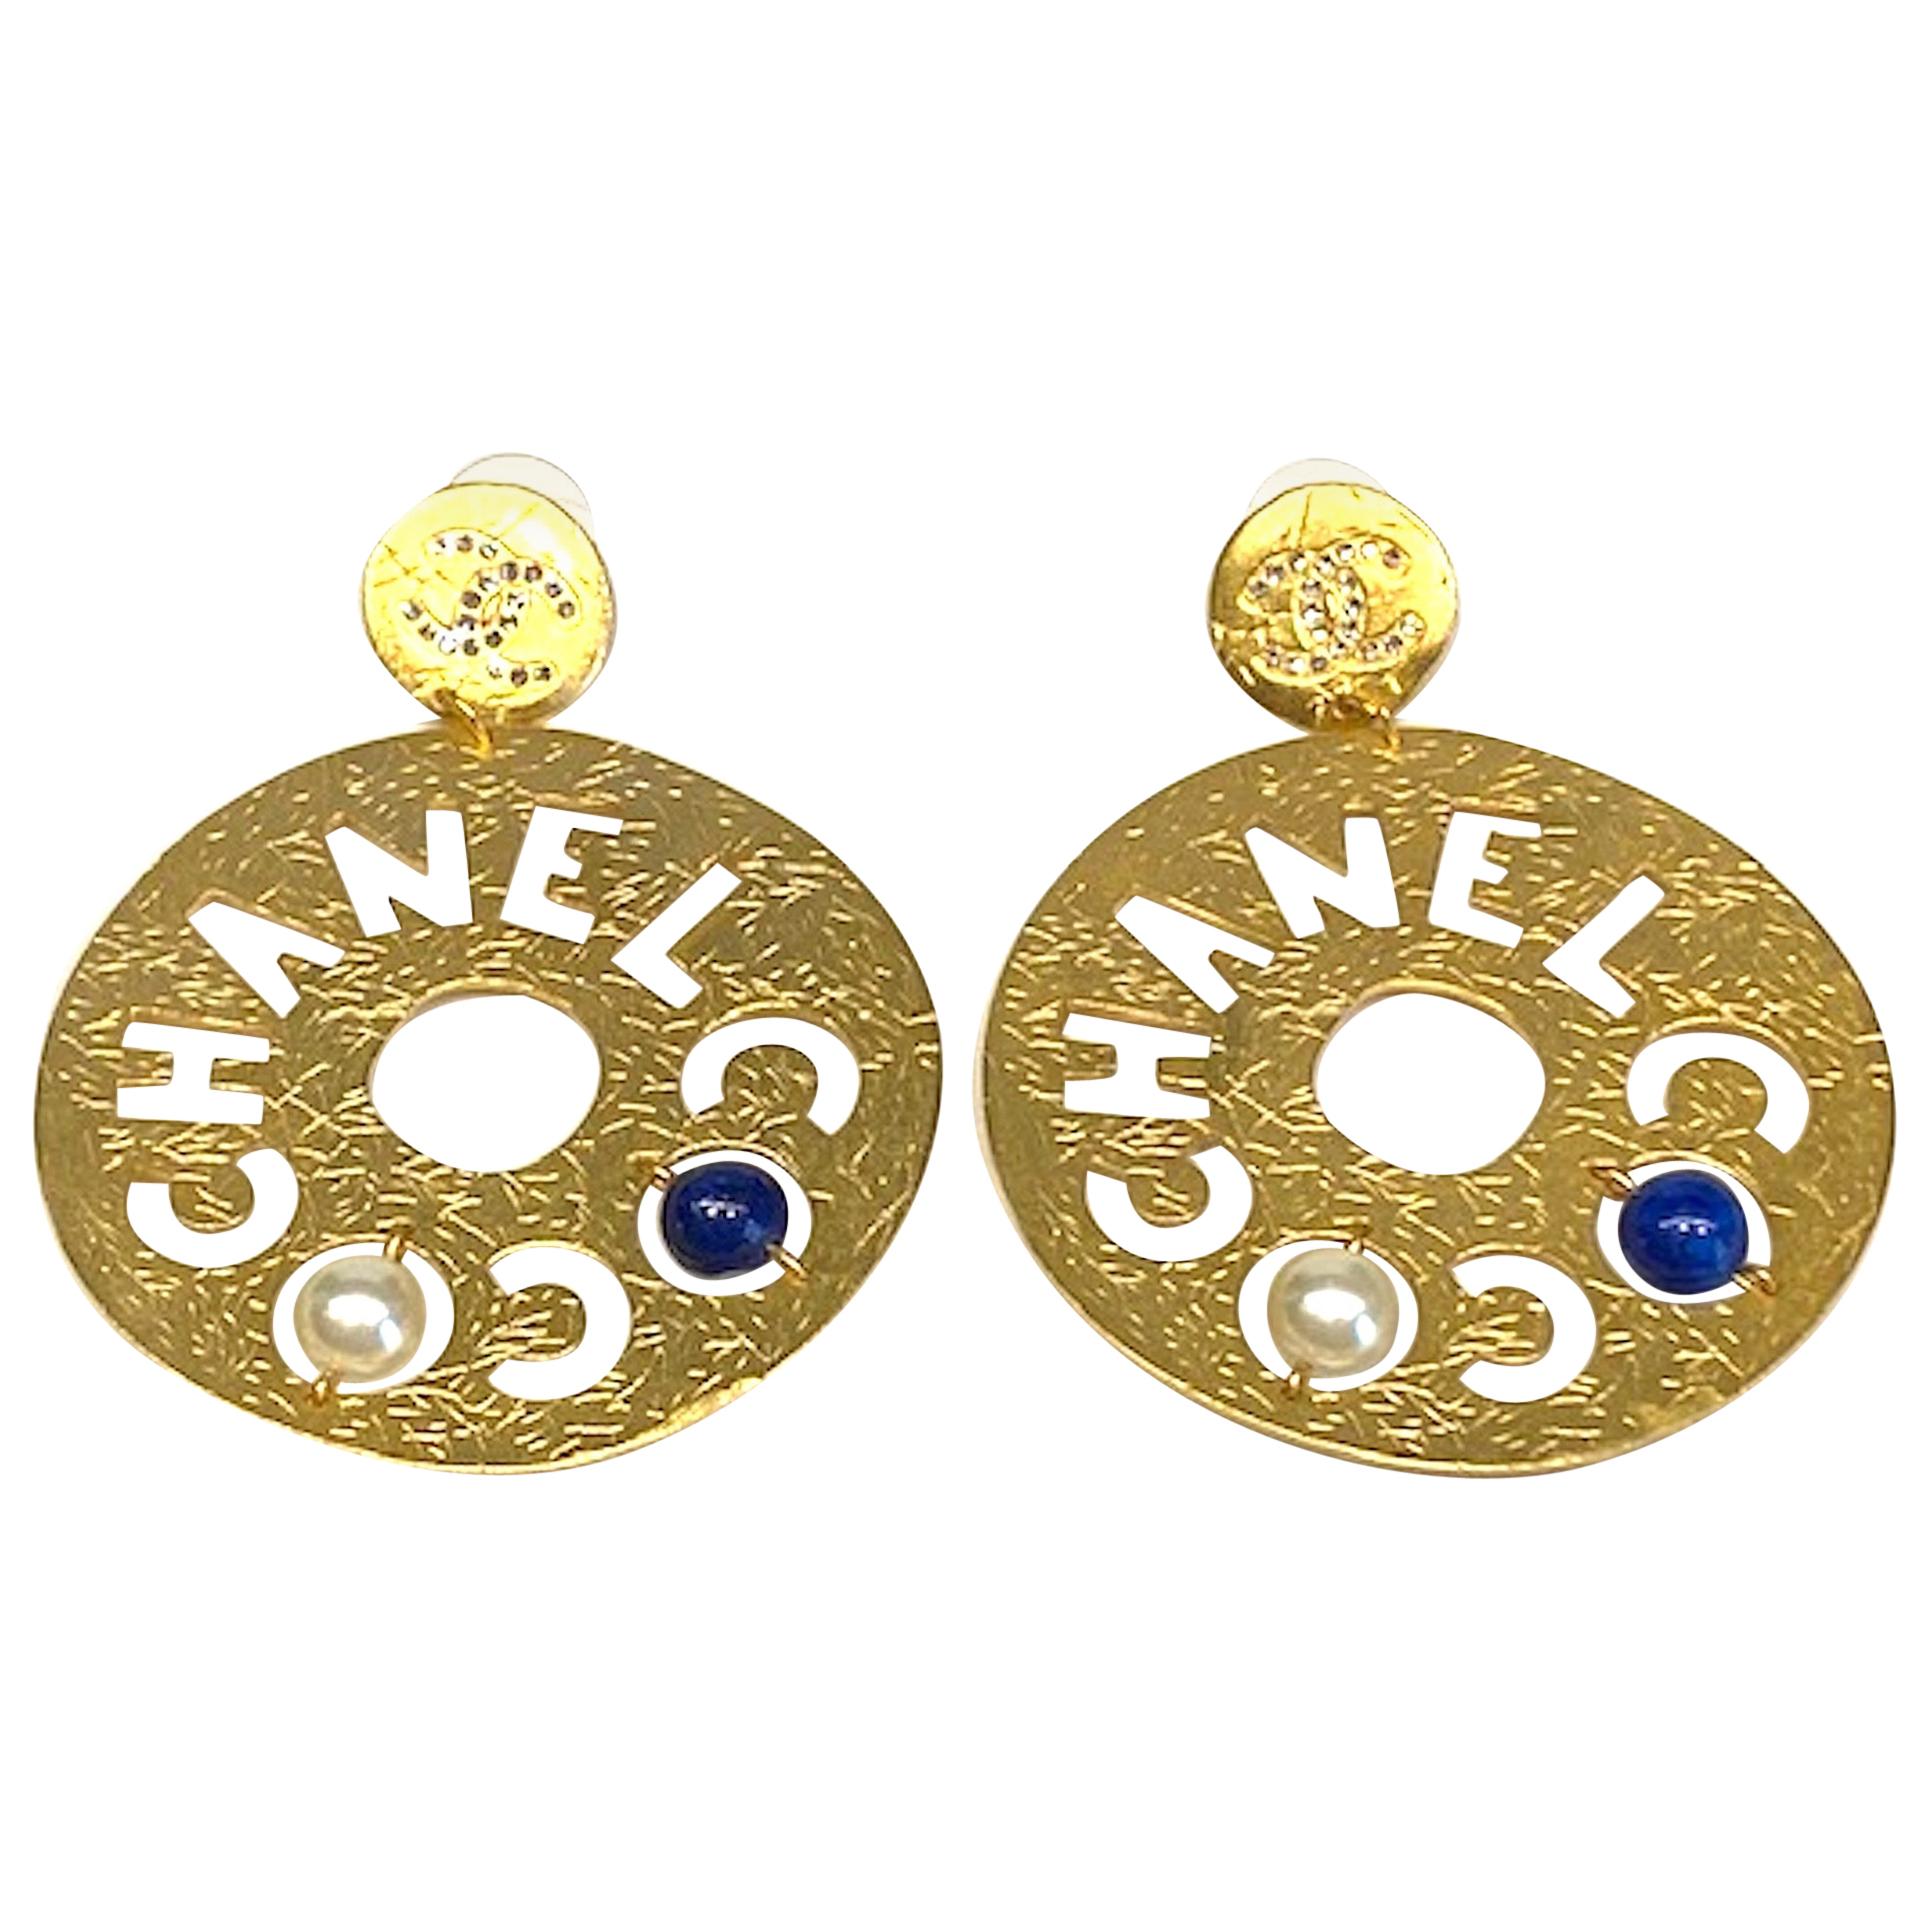 Chanel Large Cut Out Disk Pendant Earrings, Autumn 2019 Collection